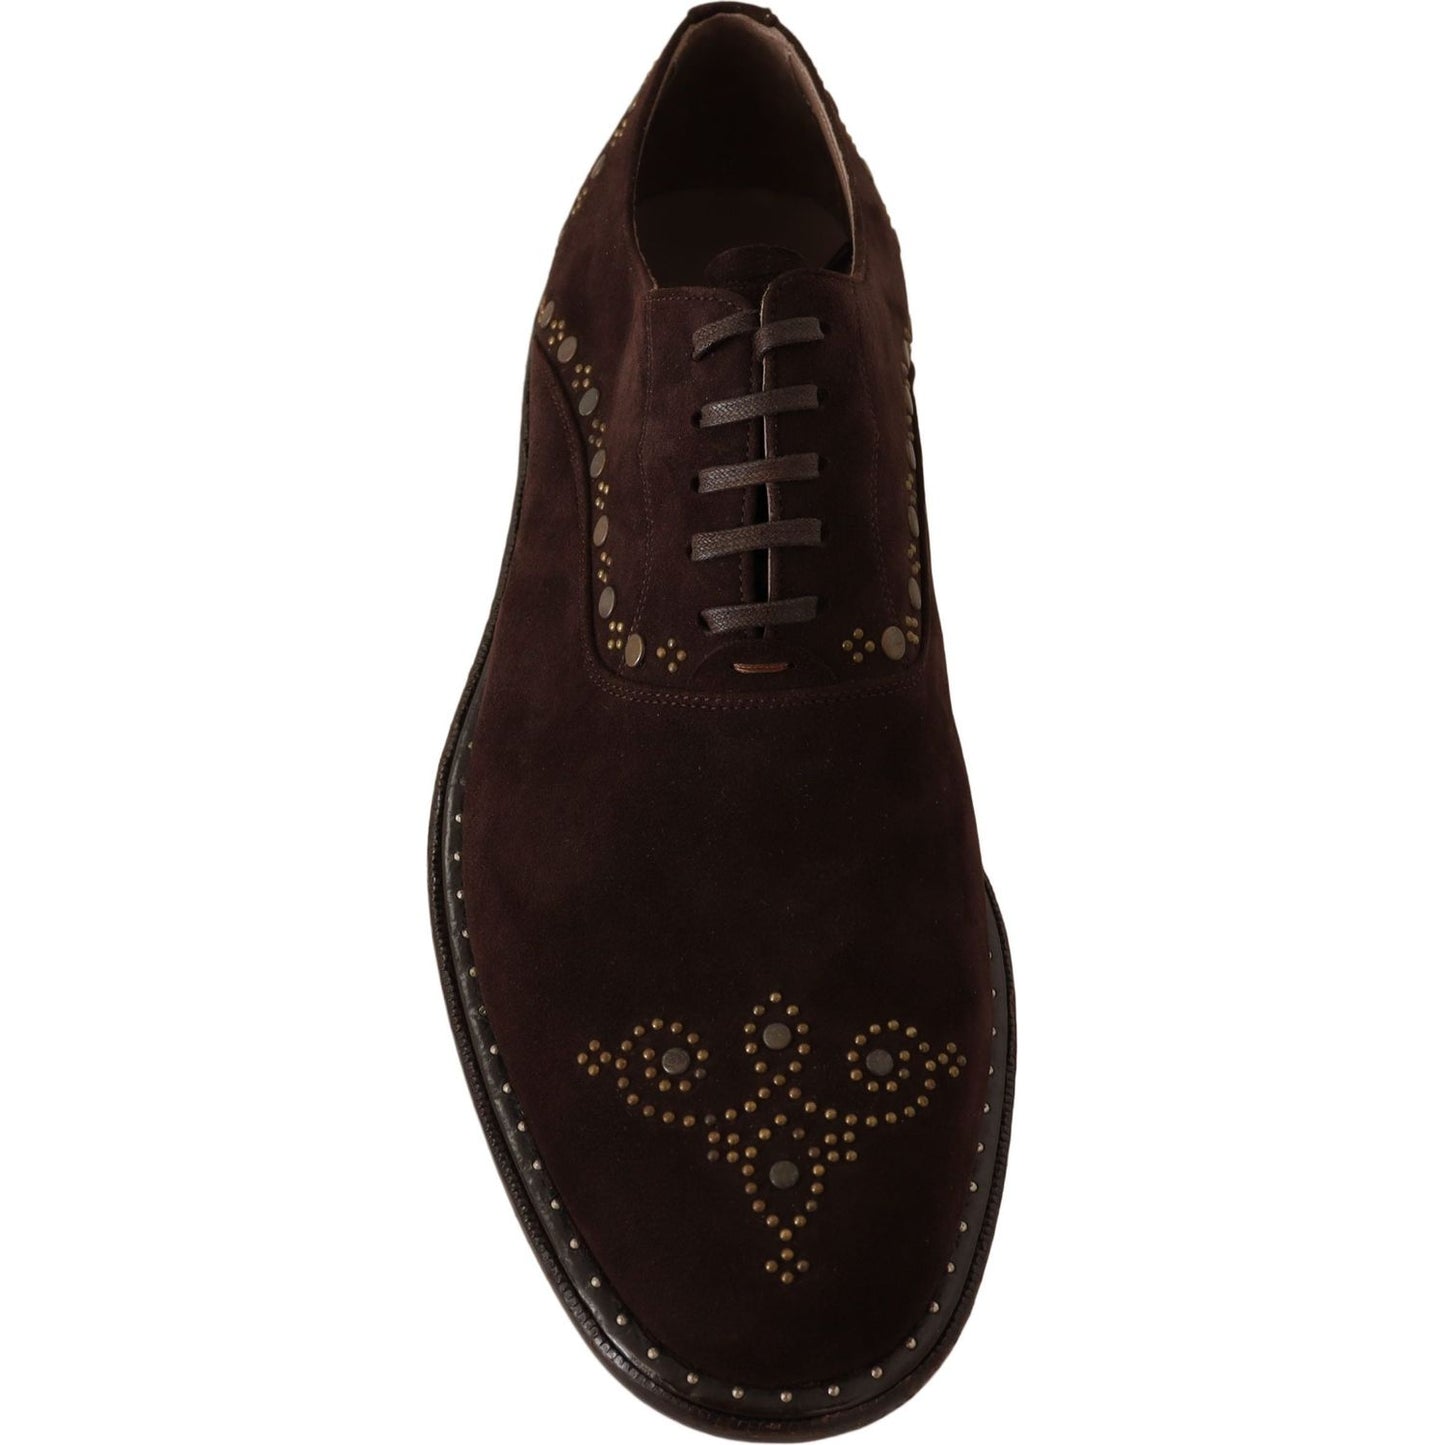 Dolce & Gabbana Elegant Brown Suede Studded Derby Shoes Dress Shoes brown-suede-marsala-derby-studded-shoes IMG_0017-scaled-6a168034-d44.jpg